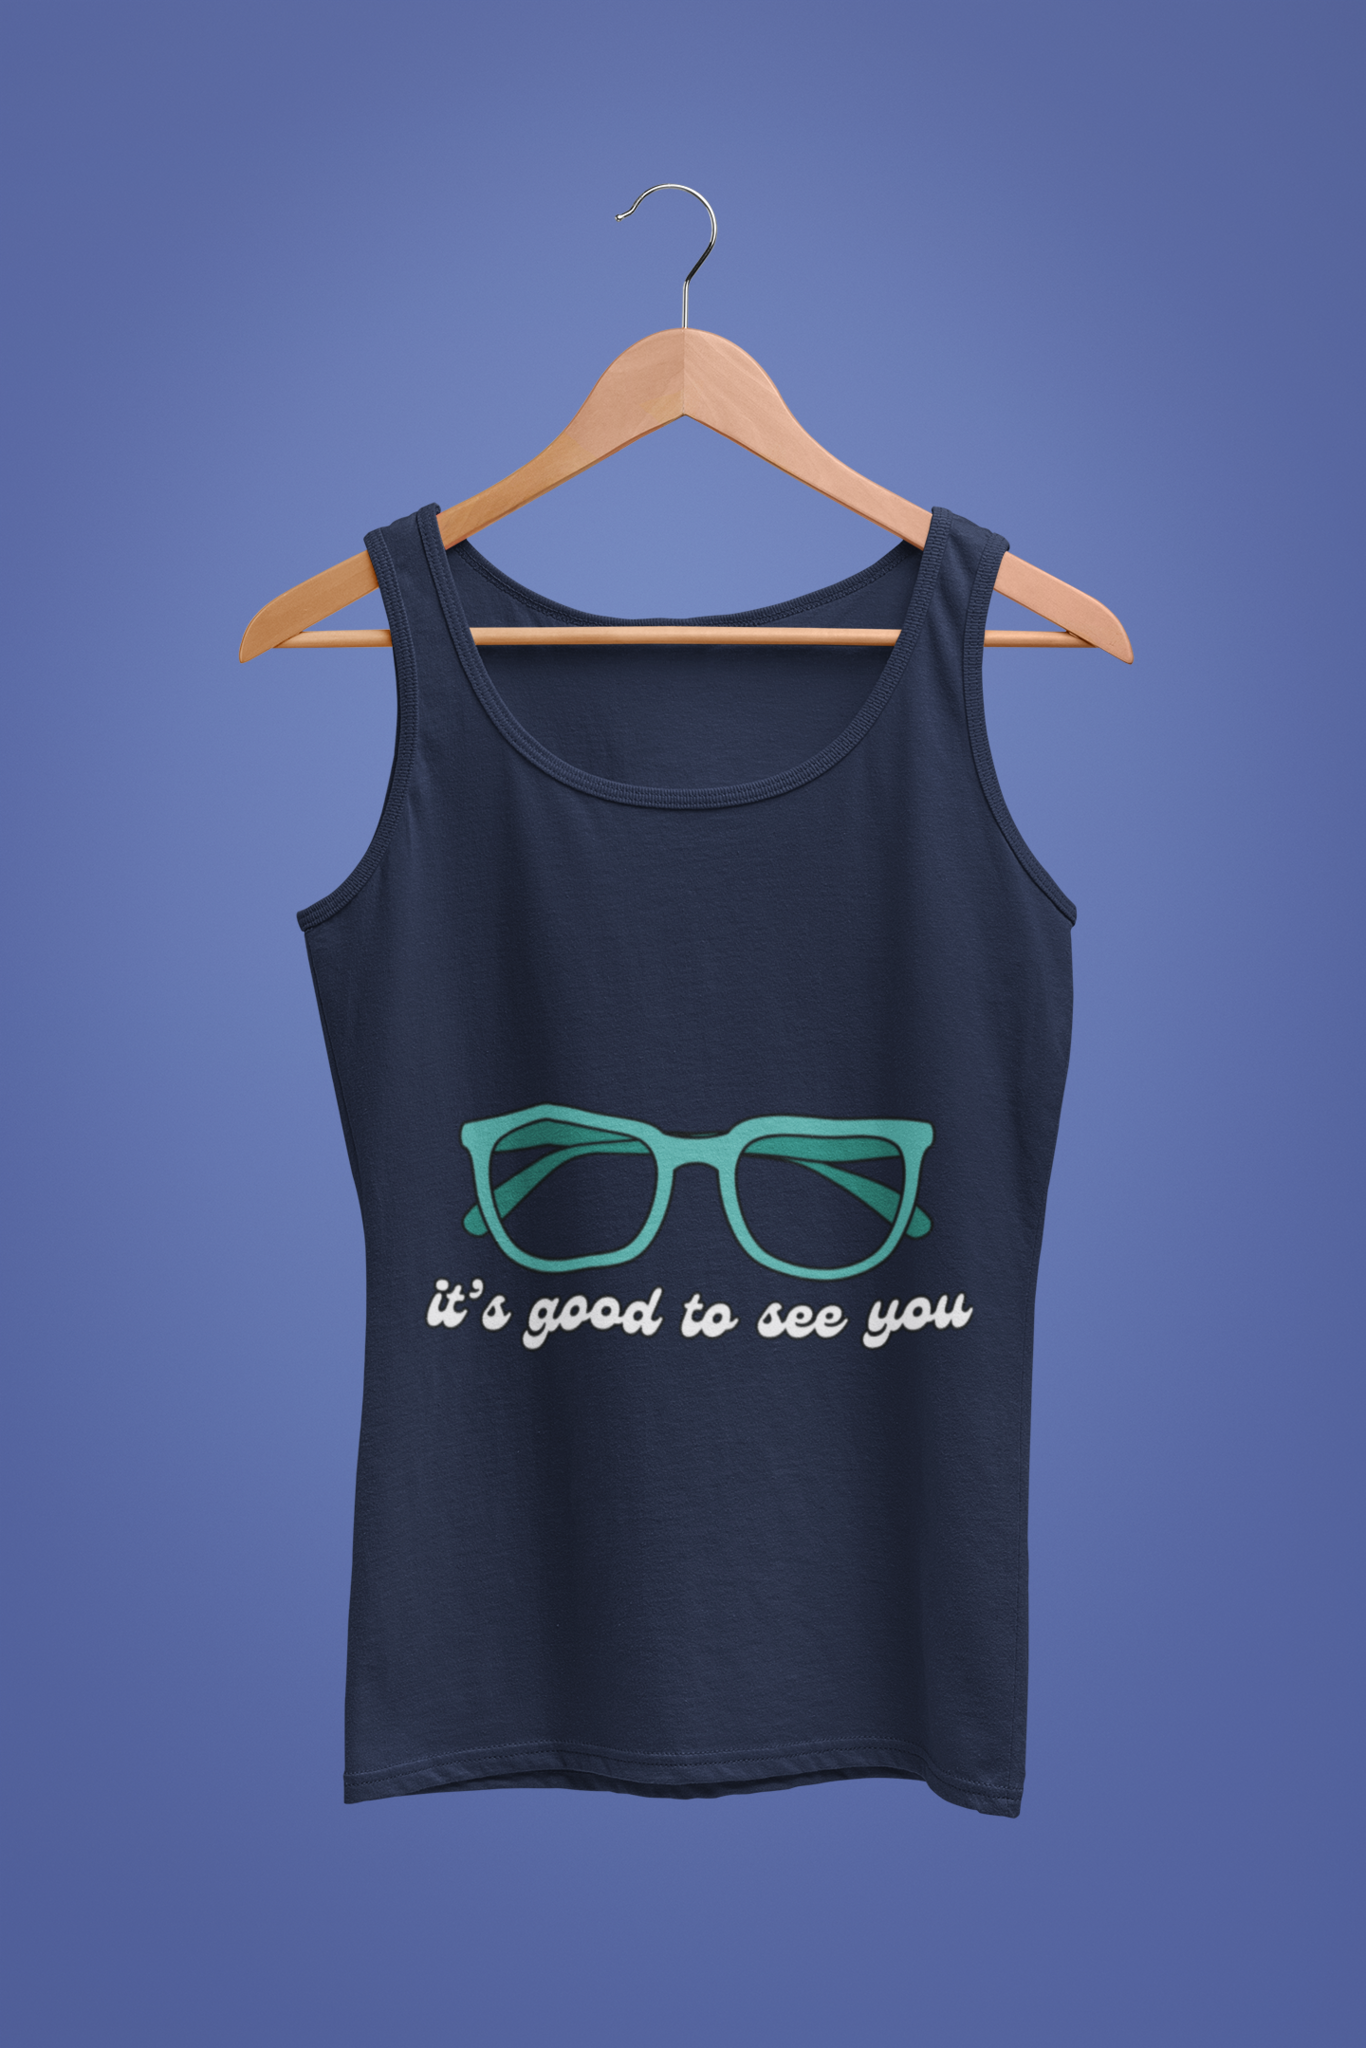 Women's Tank Top: See you